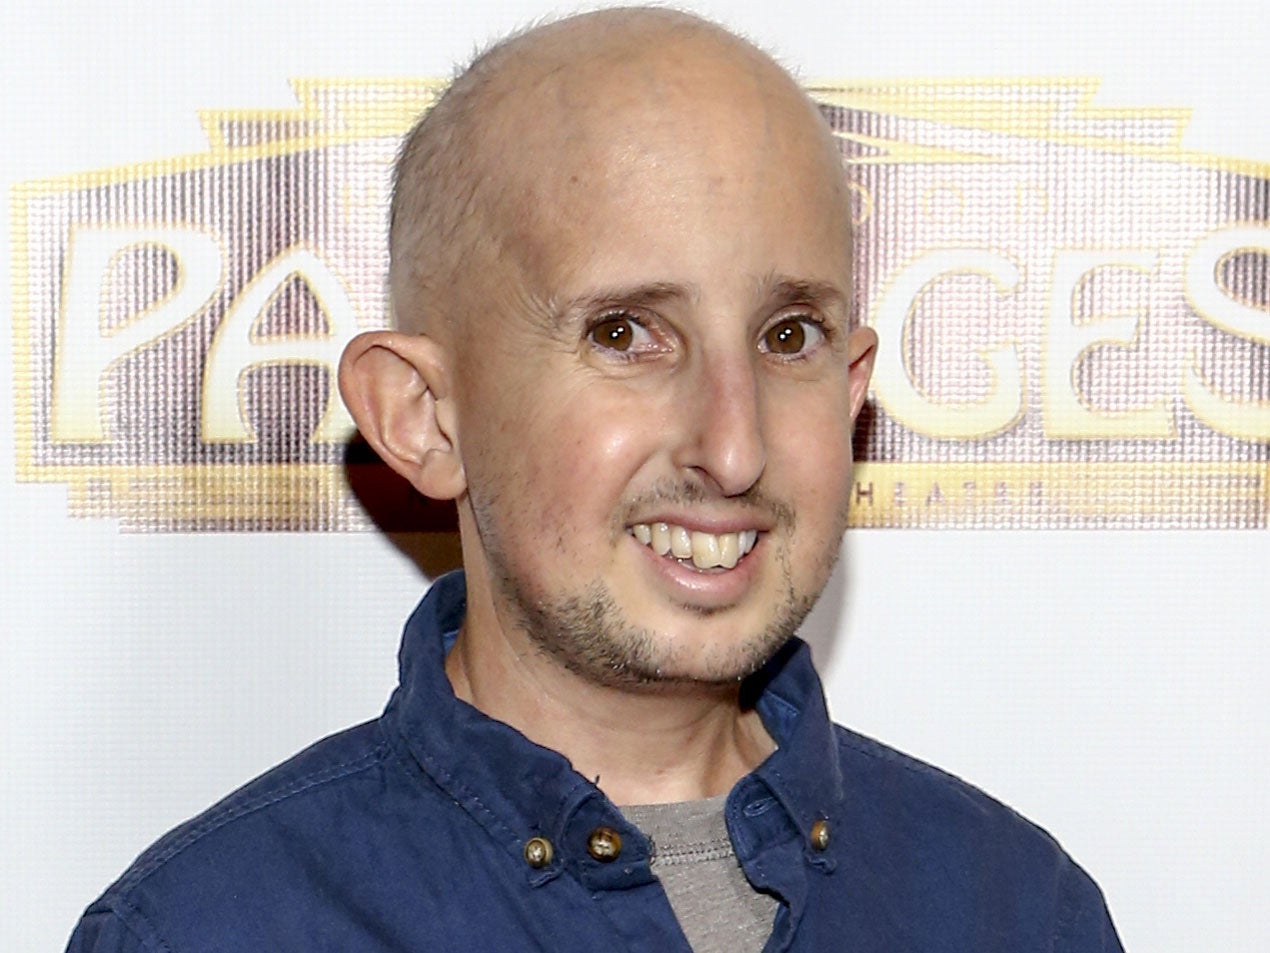 Ben Woolf died at the age of 34